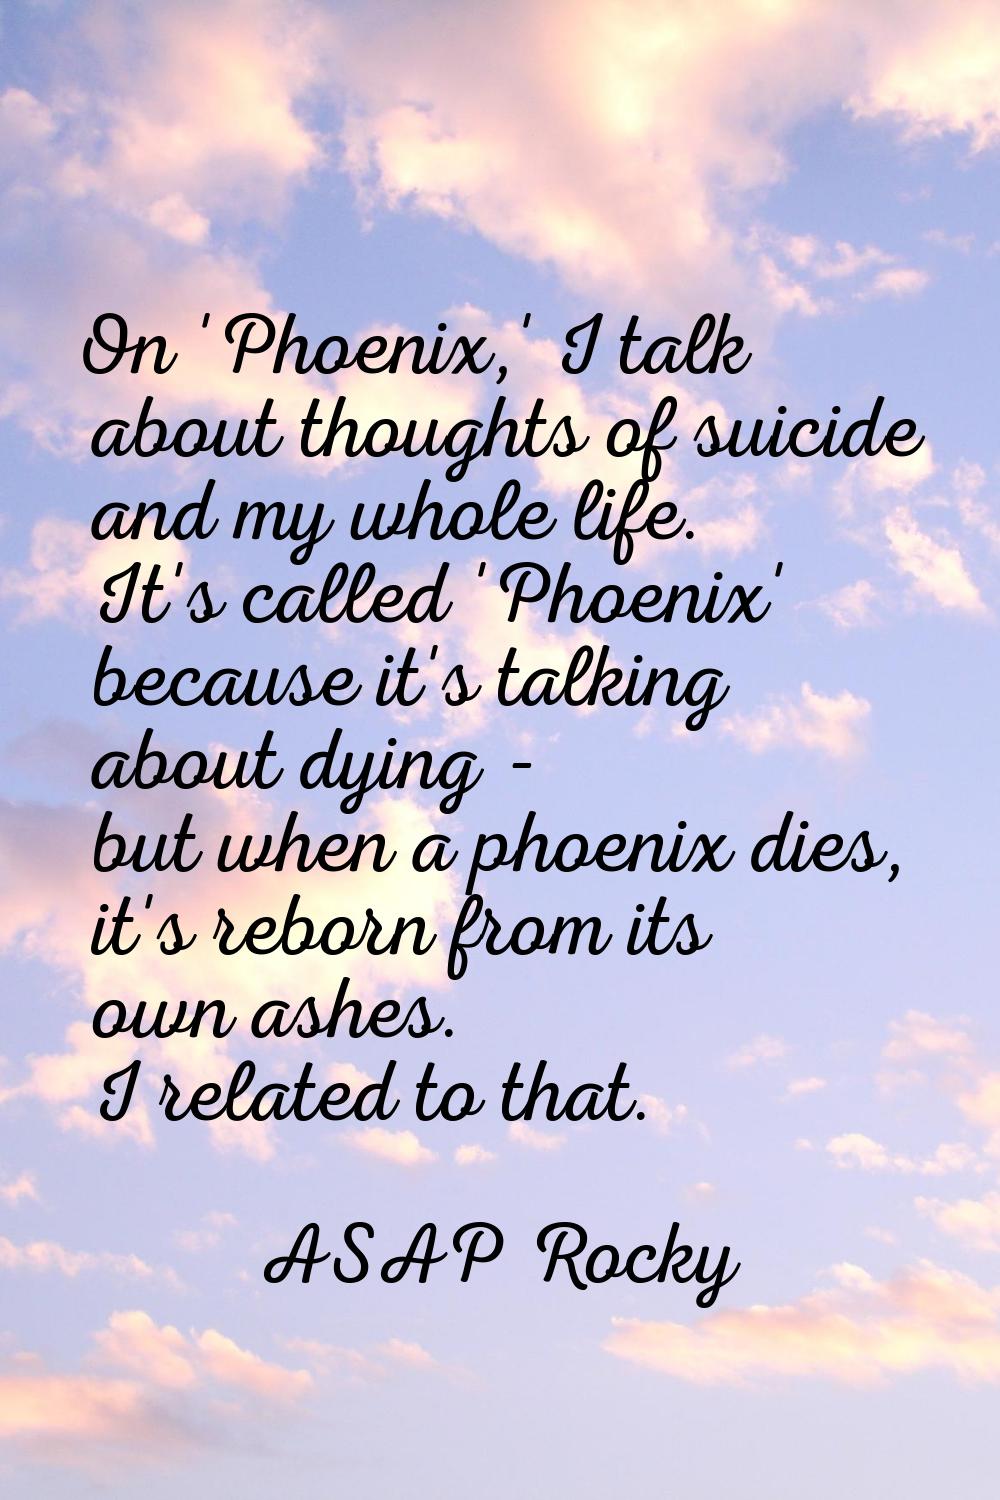 On 'Phoenix,' I talk about thoughts of suicide and my whole life. It's called 'Phoenix' because it'